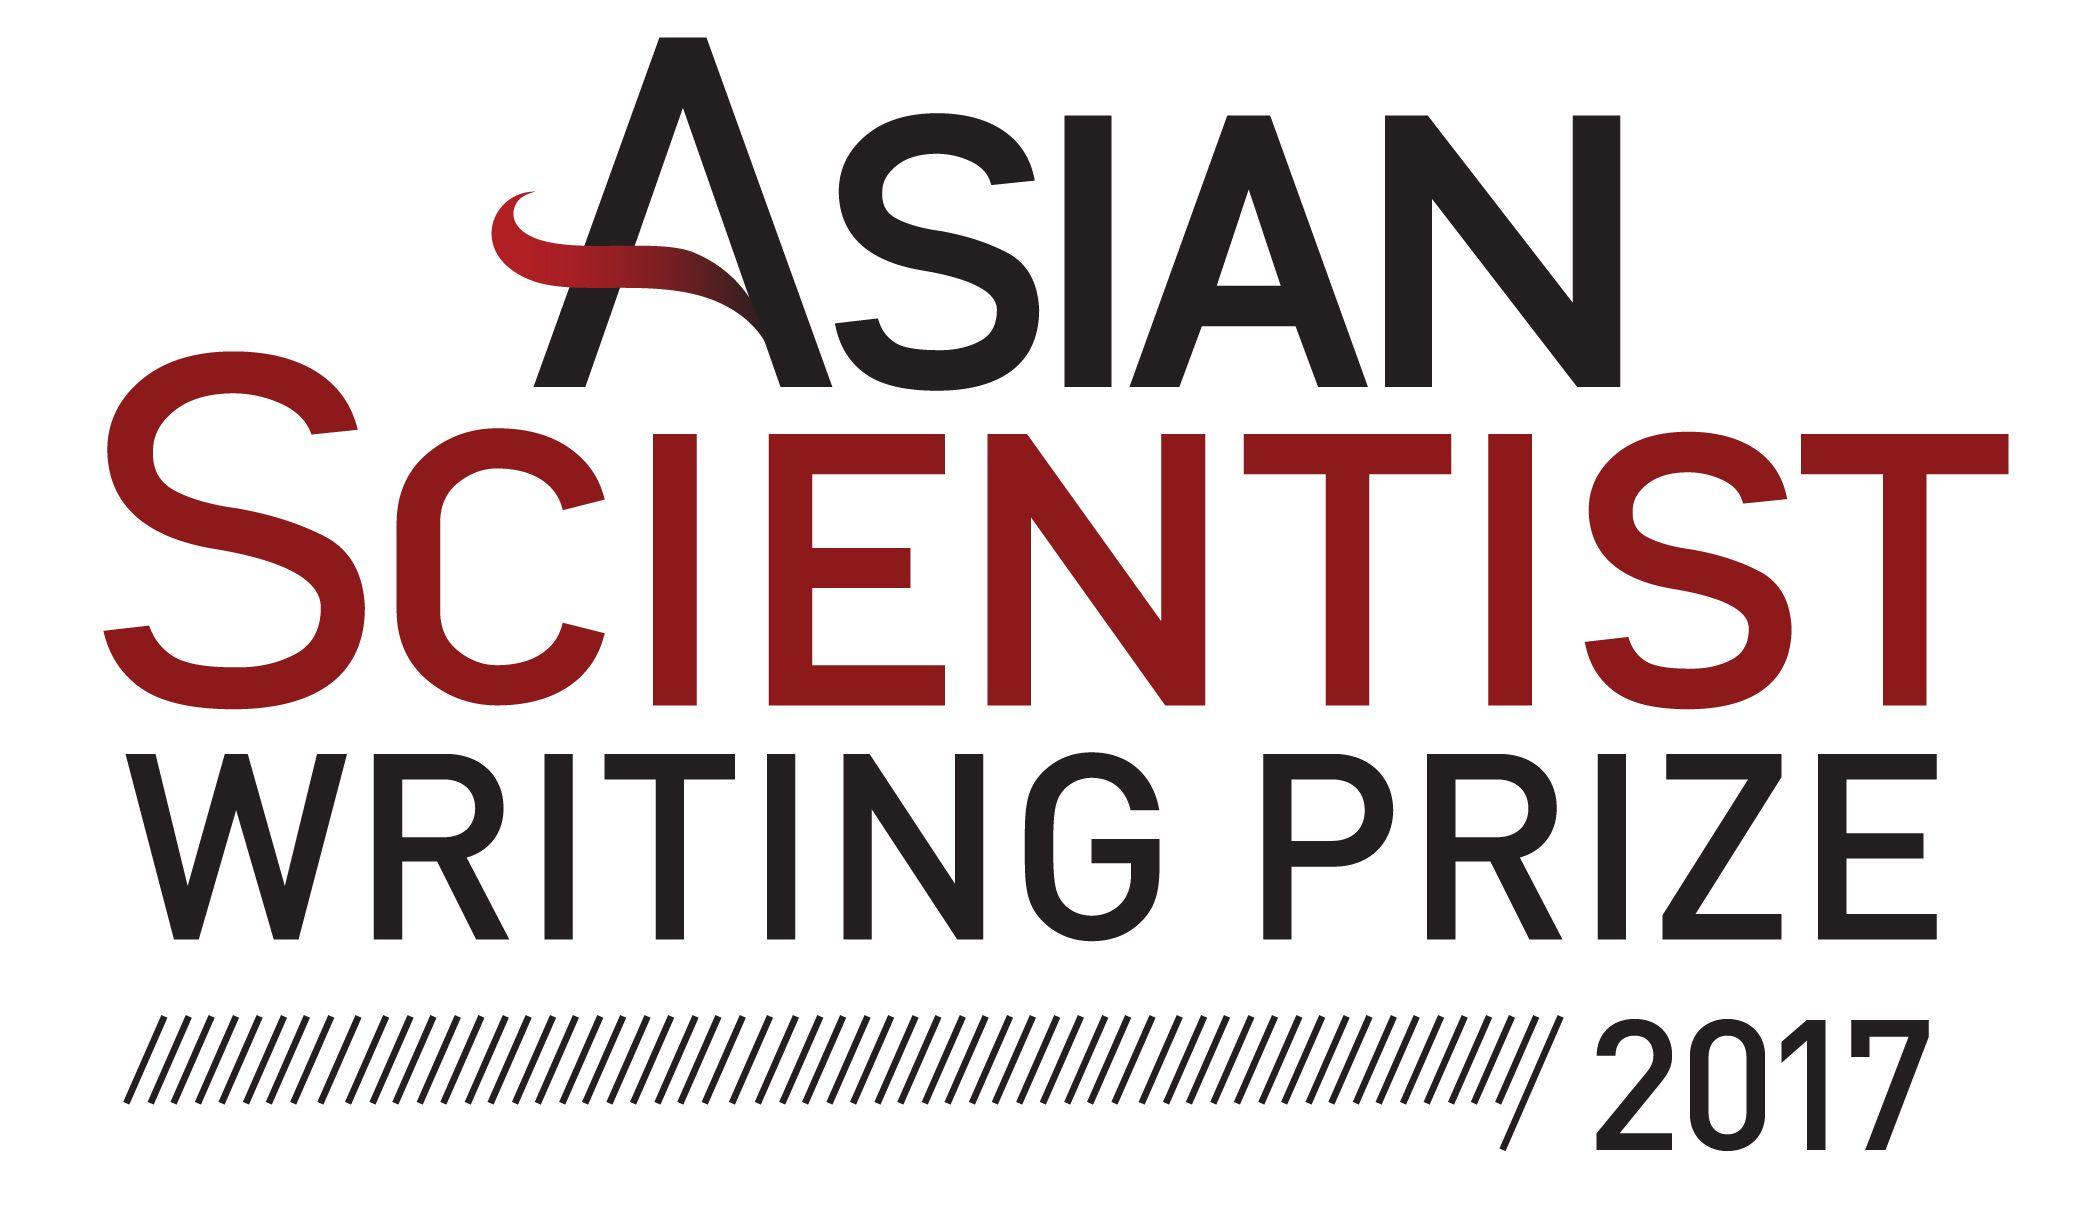 Asian Red Writing Logo - The Asian Scientist Writing Prize 2017. Asian Scientist Magazine